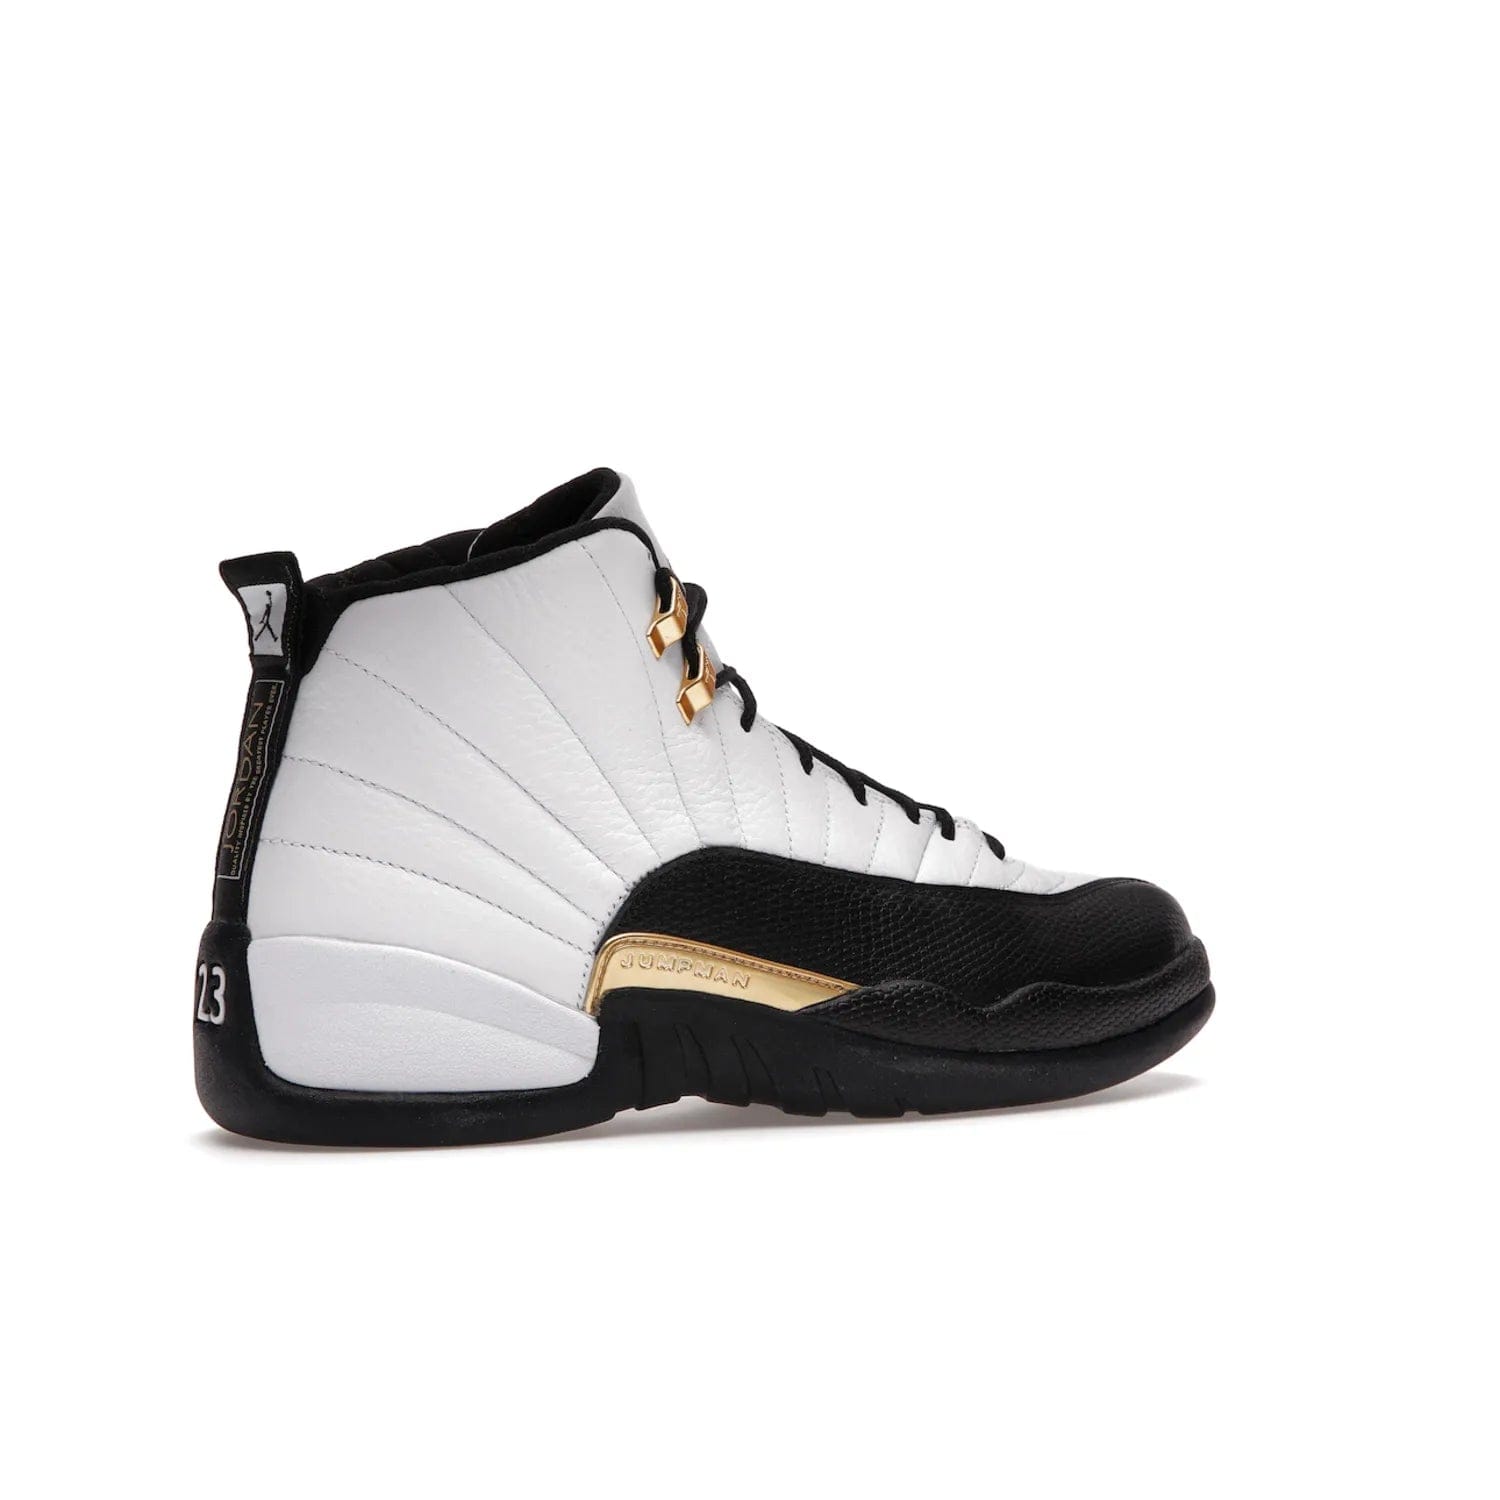 Jordan 12 Retro Royalty Taxi - Image 34 - Only at www.BallersClubKickz.com - Make a statement with the Air Jordan 12 Retro Royalty Taxi. Woven heel tag, gold plaquet, white tumbled leather upper plus a black toe wrap, make this modern take on the classic a must-have. Available in November 2021.